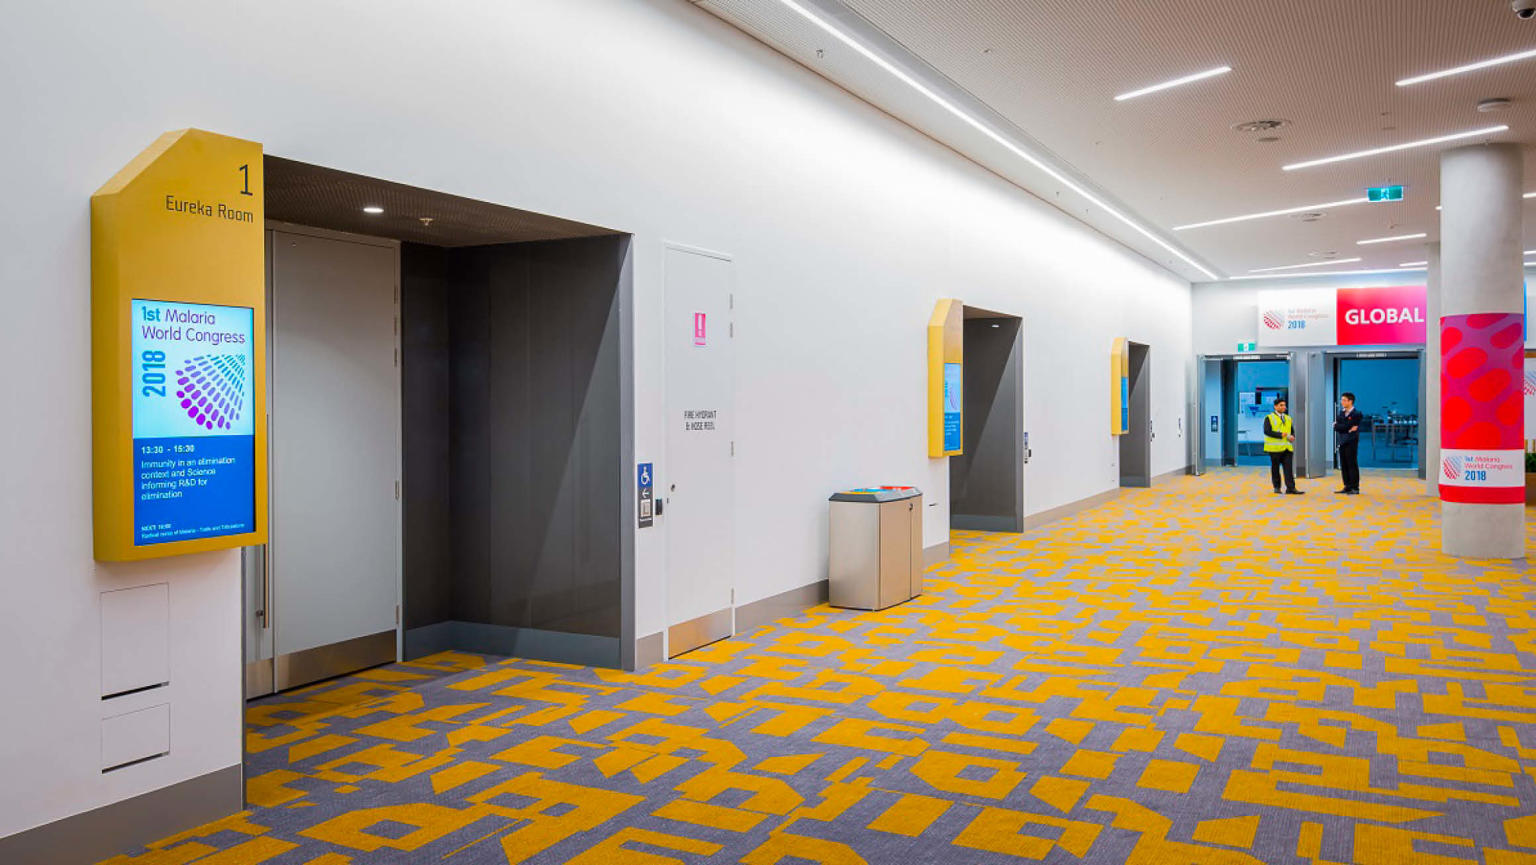 A spacious foyer with multiple room entrances. The carpet displays a combination of yellow and grey tones, while eye-catching bright red and pink signage adorns the surroundings.